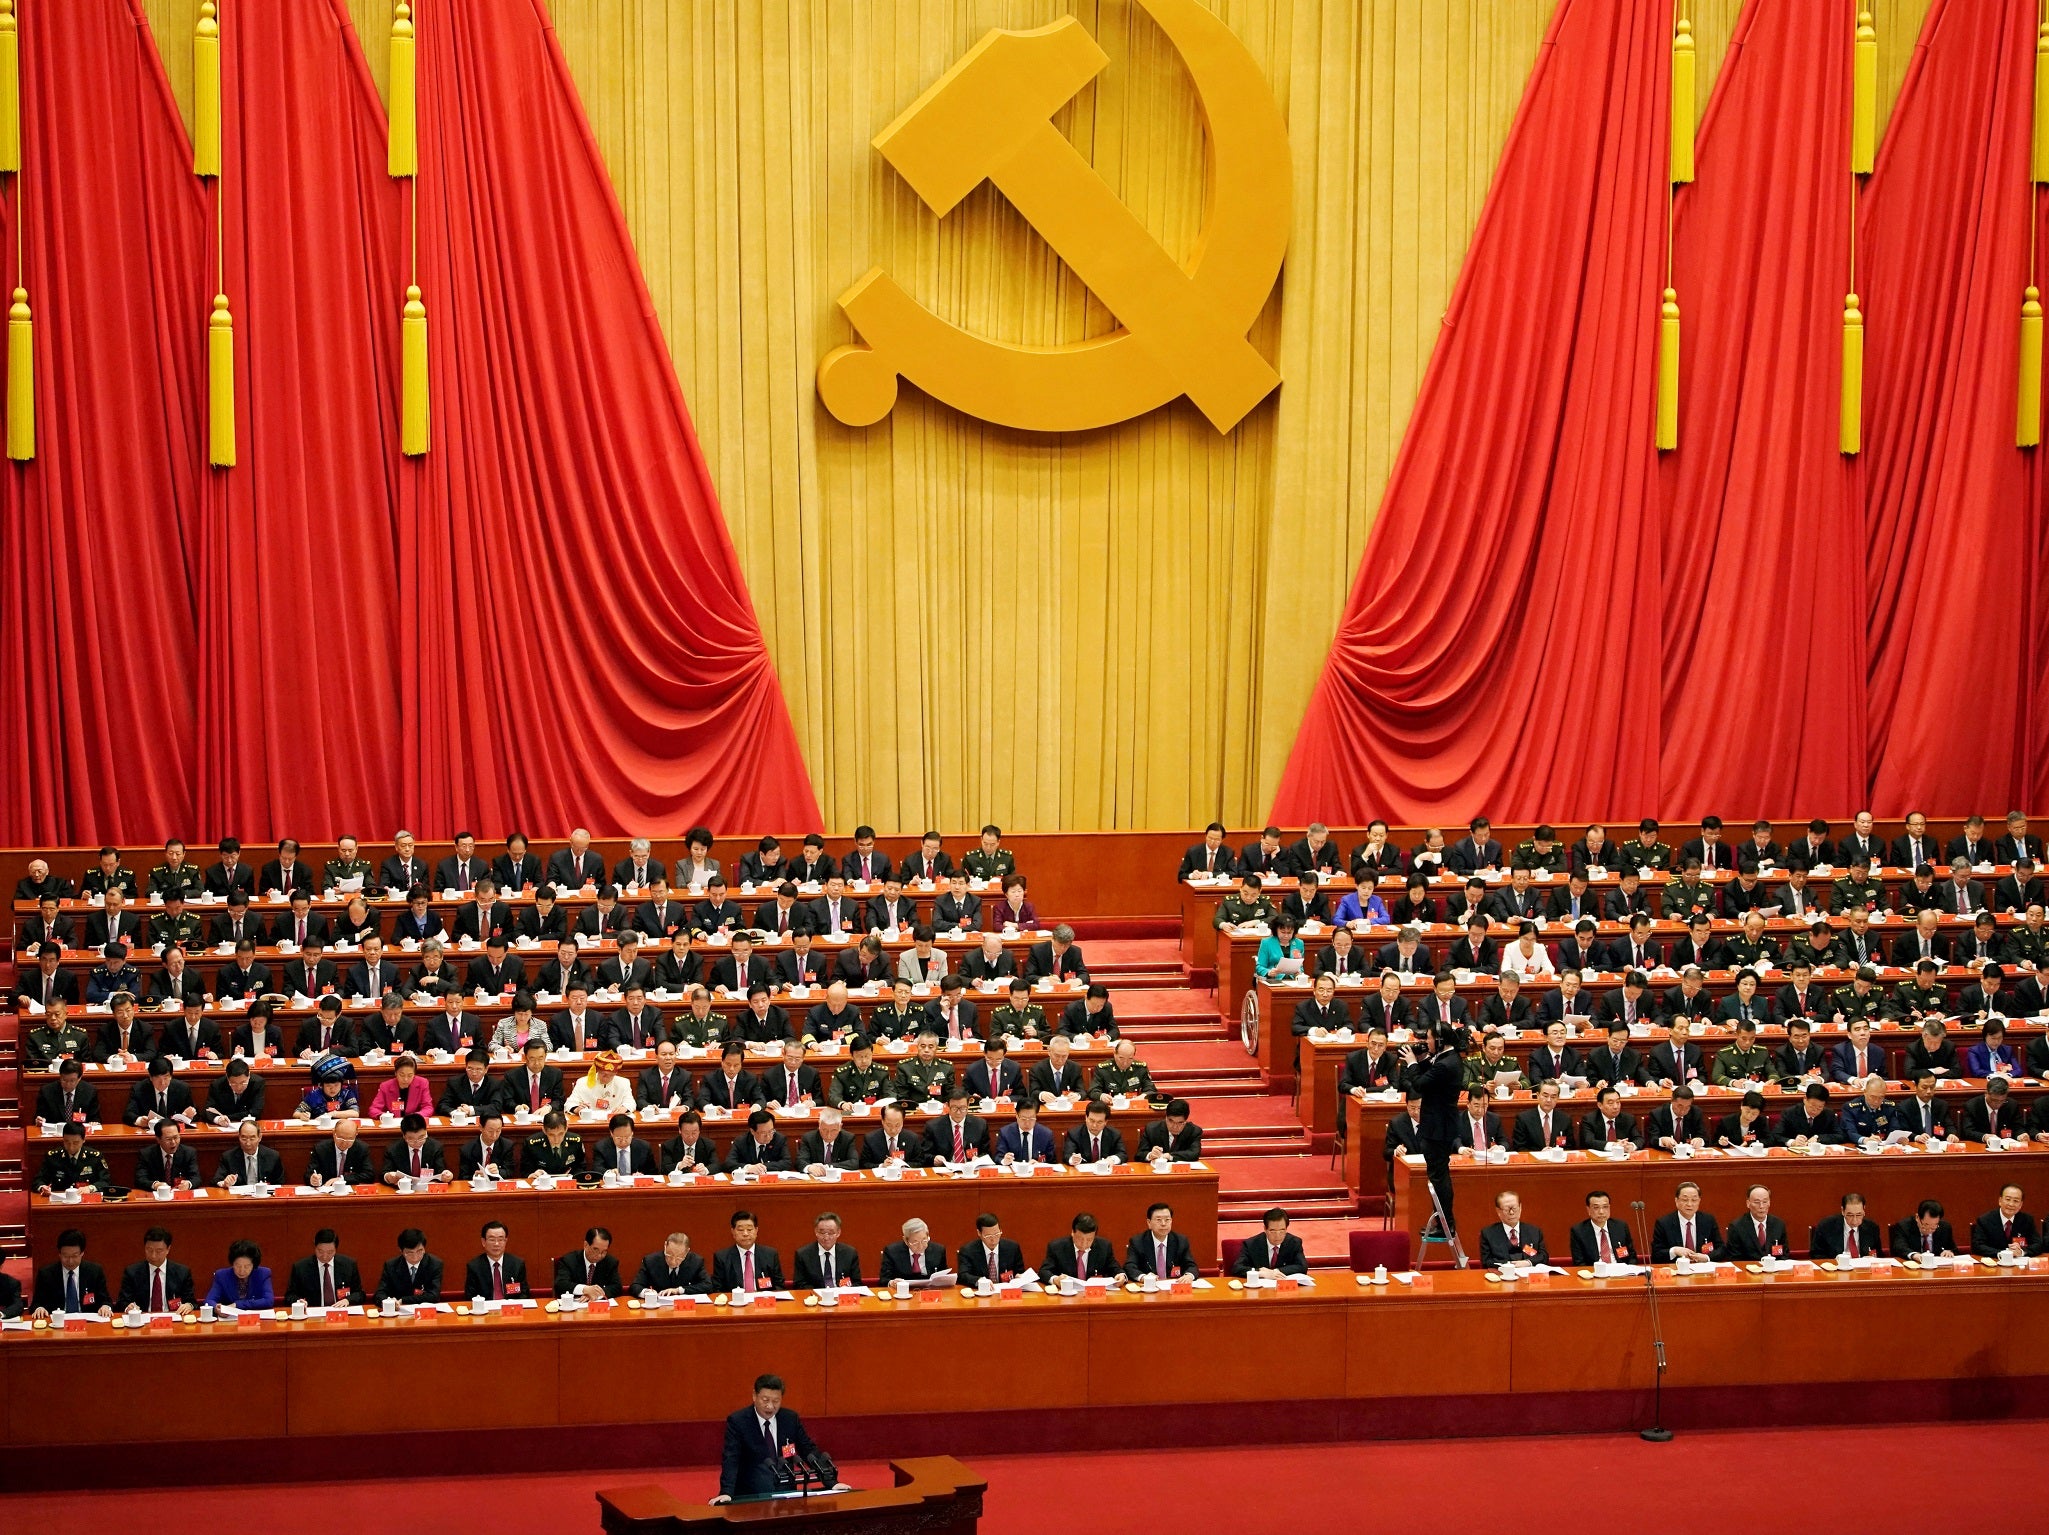 Chinese President Xi Jinping speaks during the opening session of the 19th National Congress of the Communist Party of China